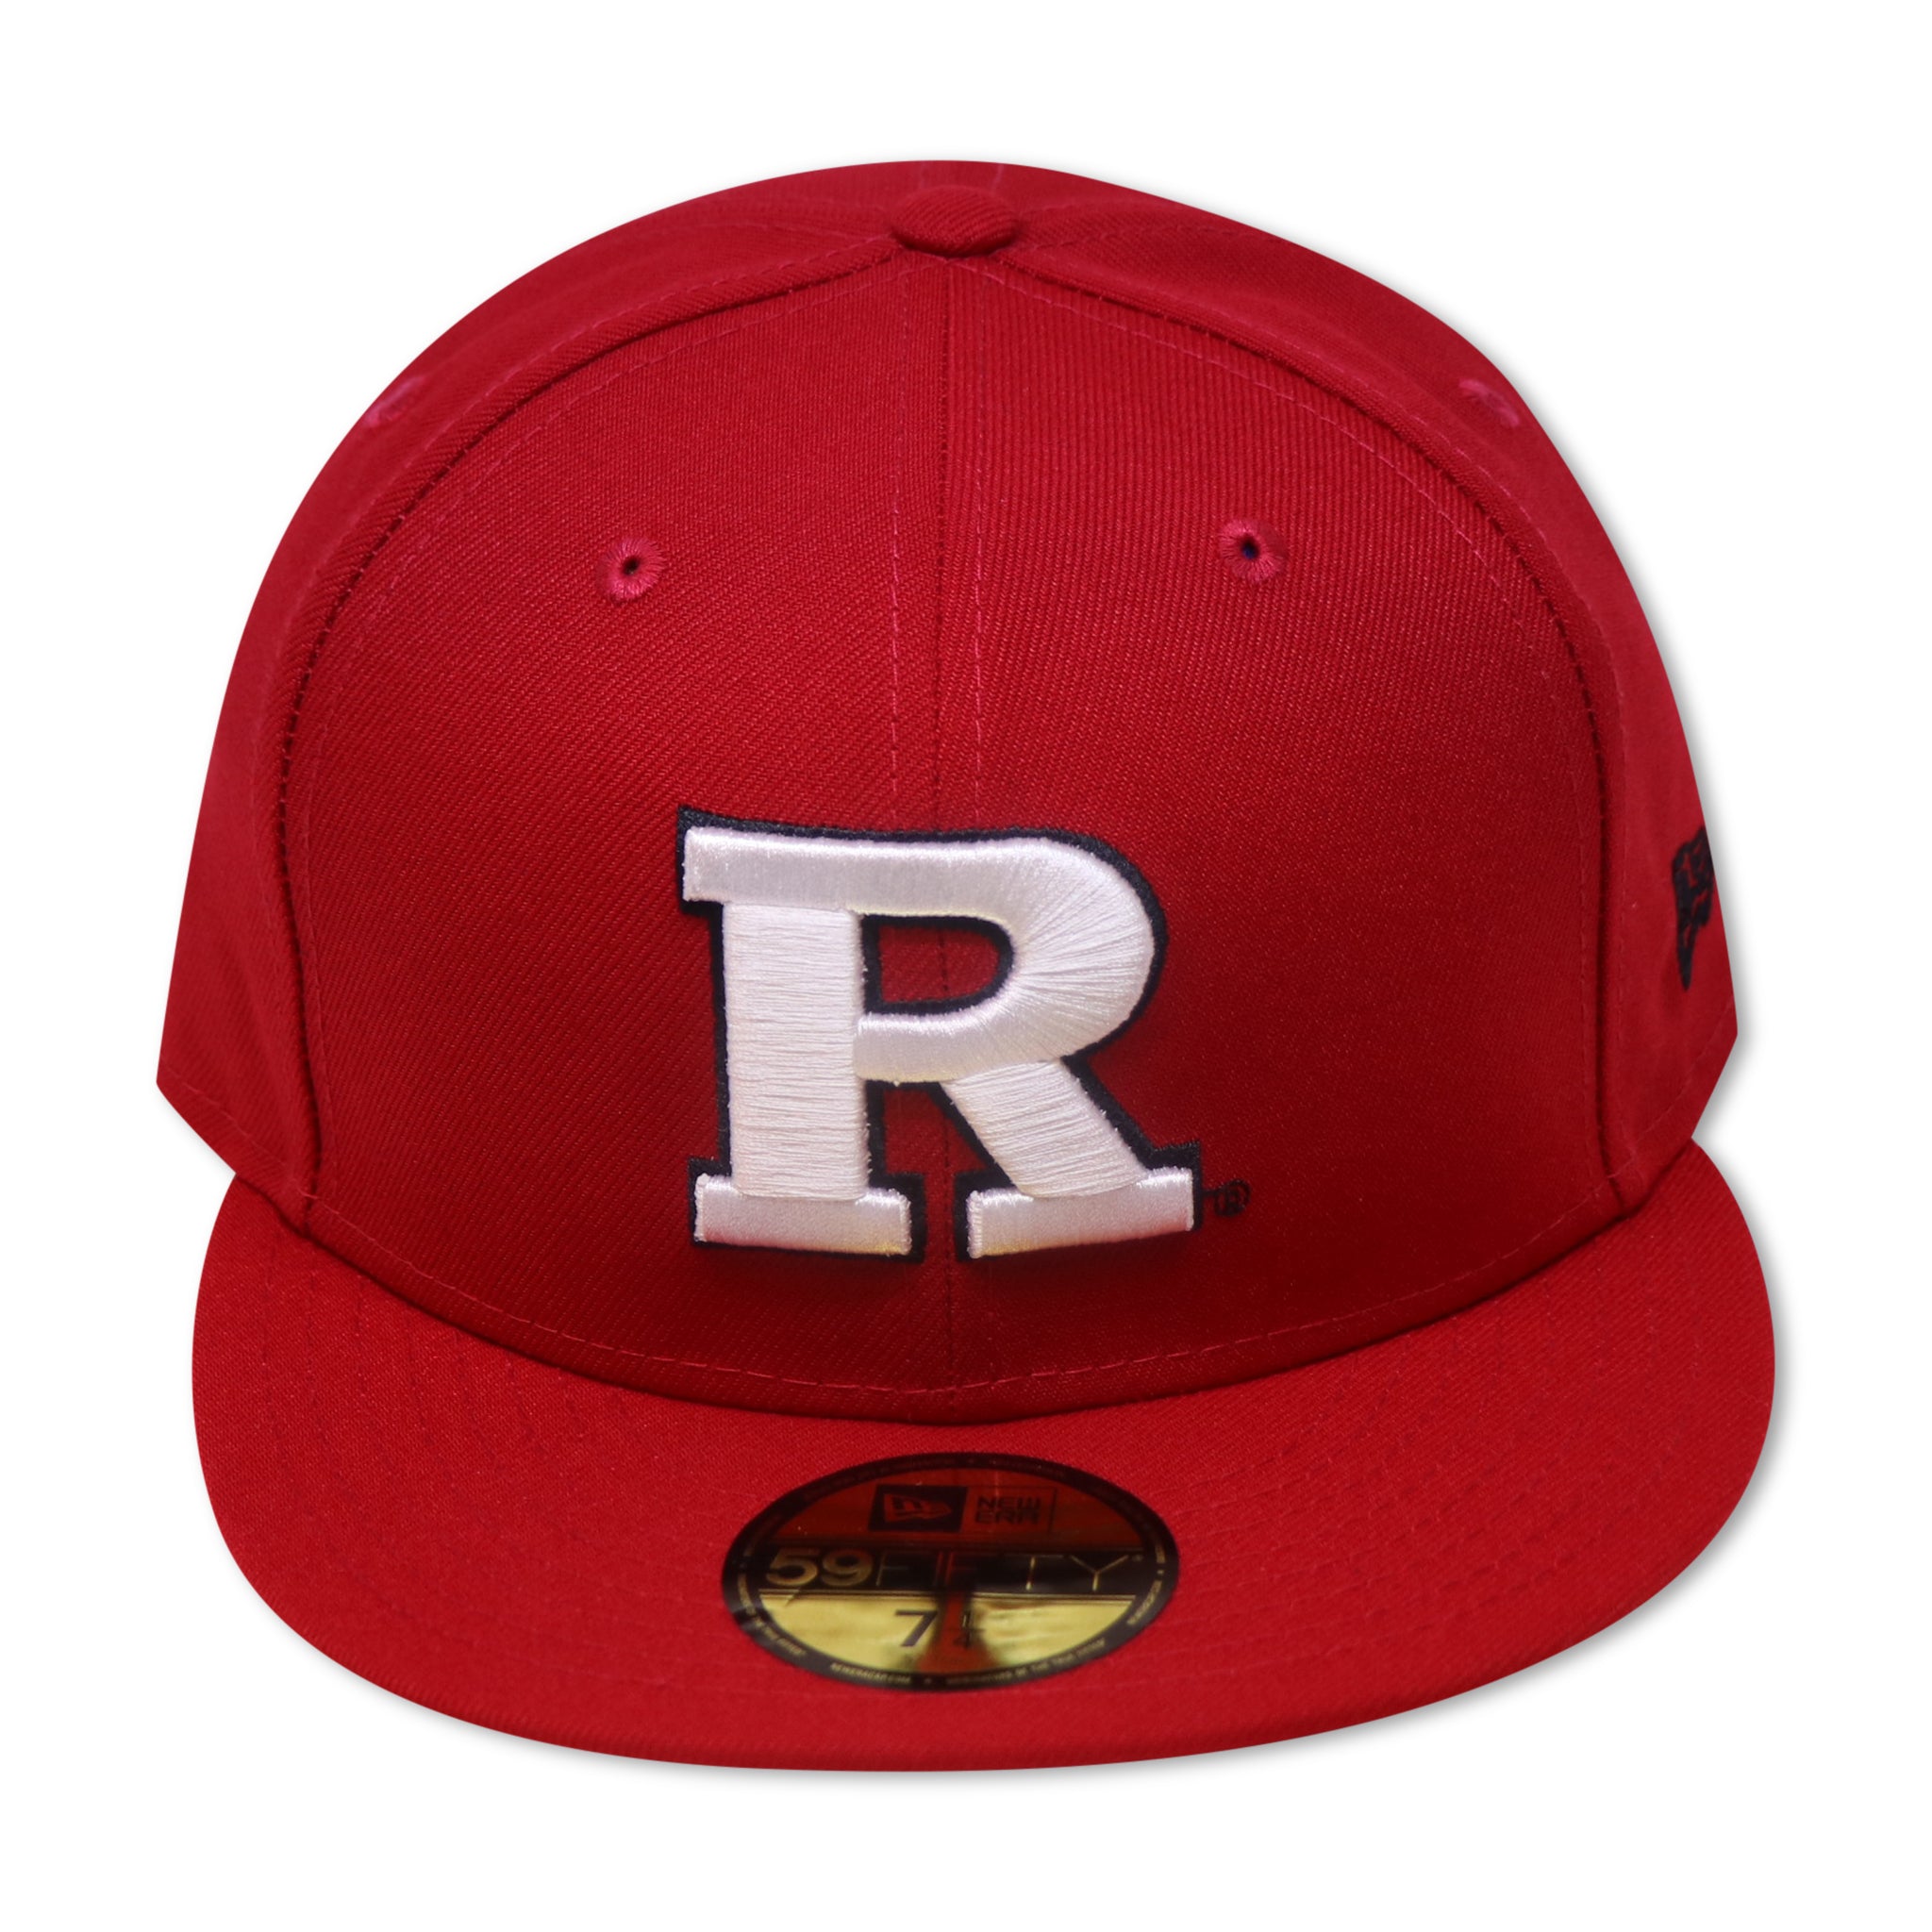 RUTGER SCARLET KNIGHTS NEW ERA 59FIFTY FITTED